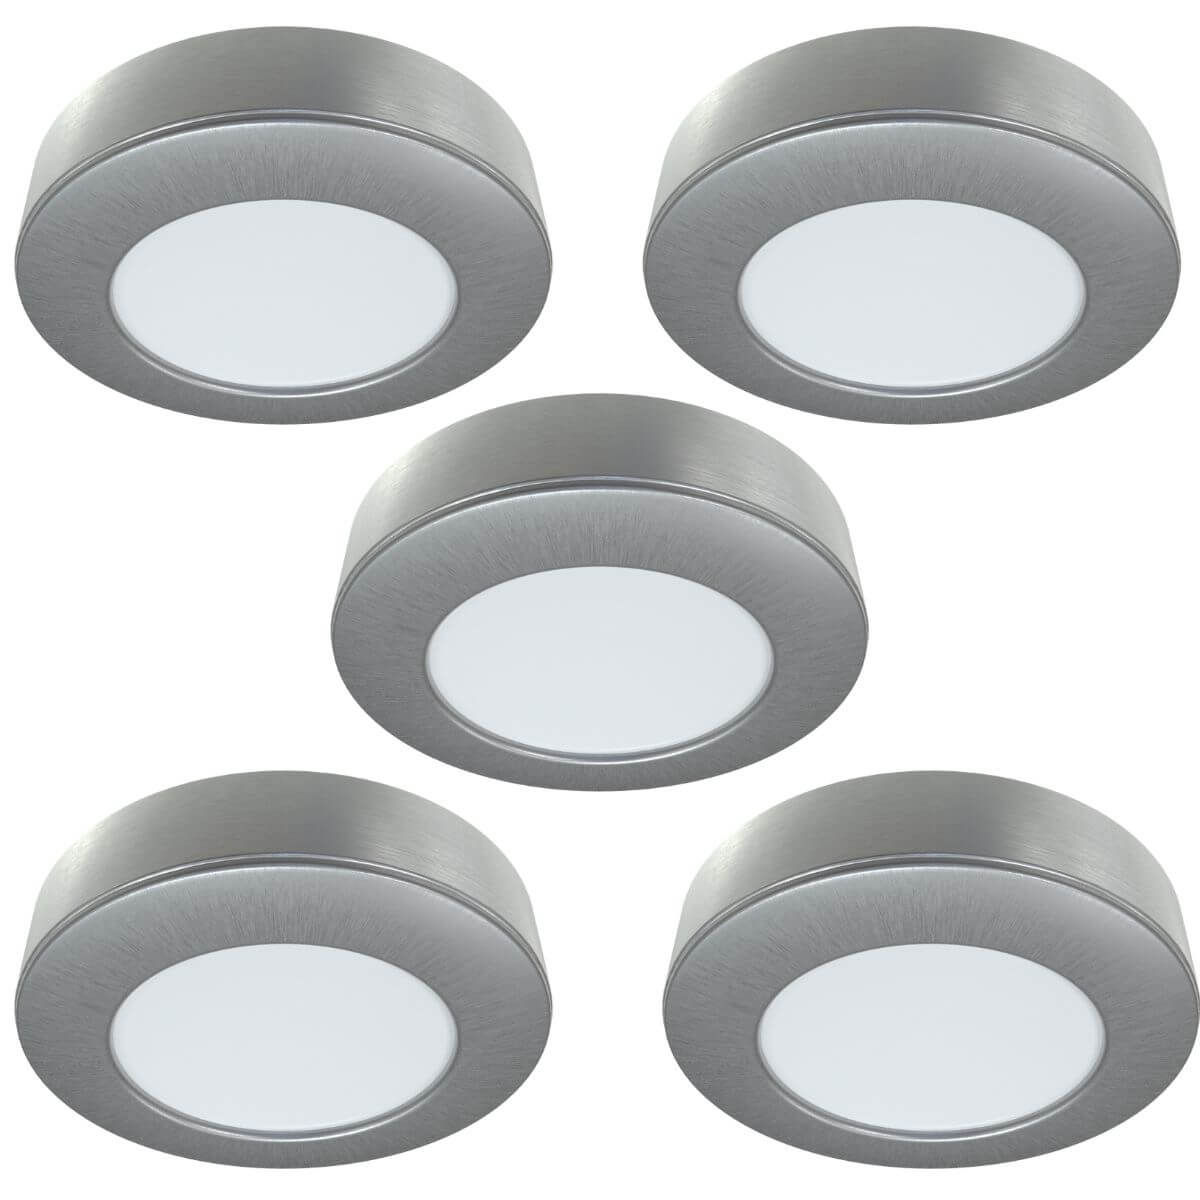 View Pack of 5 No Dot Design Surface Mounted LED Under Cabinet Light UltraHigh Brightness 15w Driver information